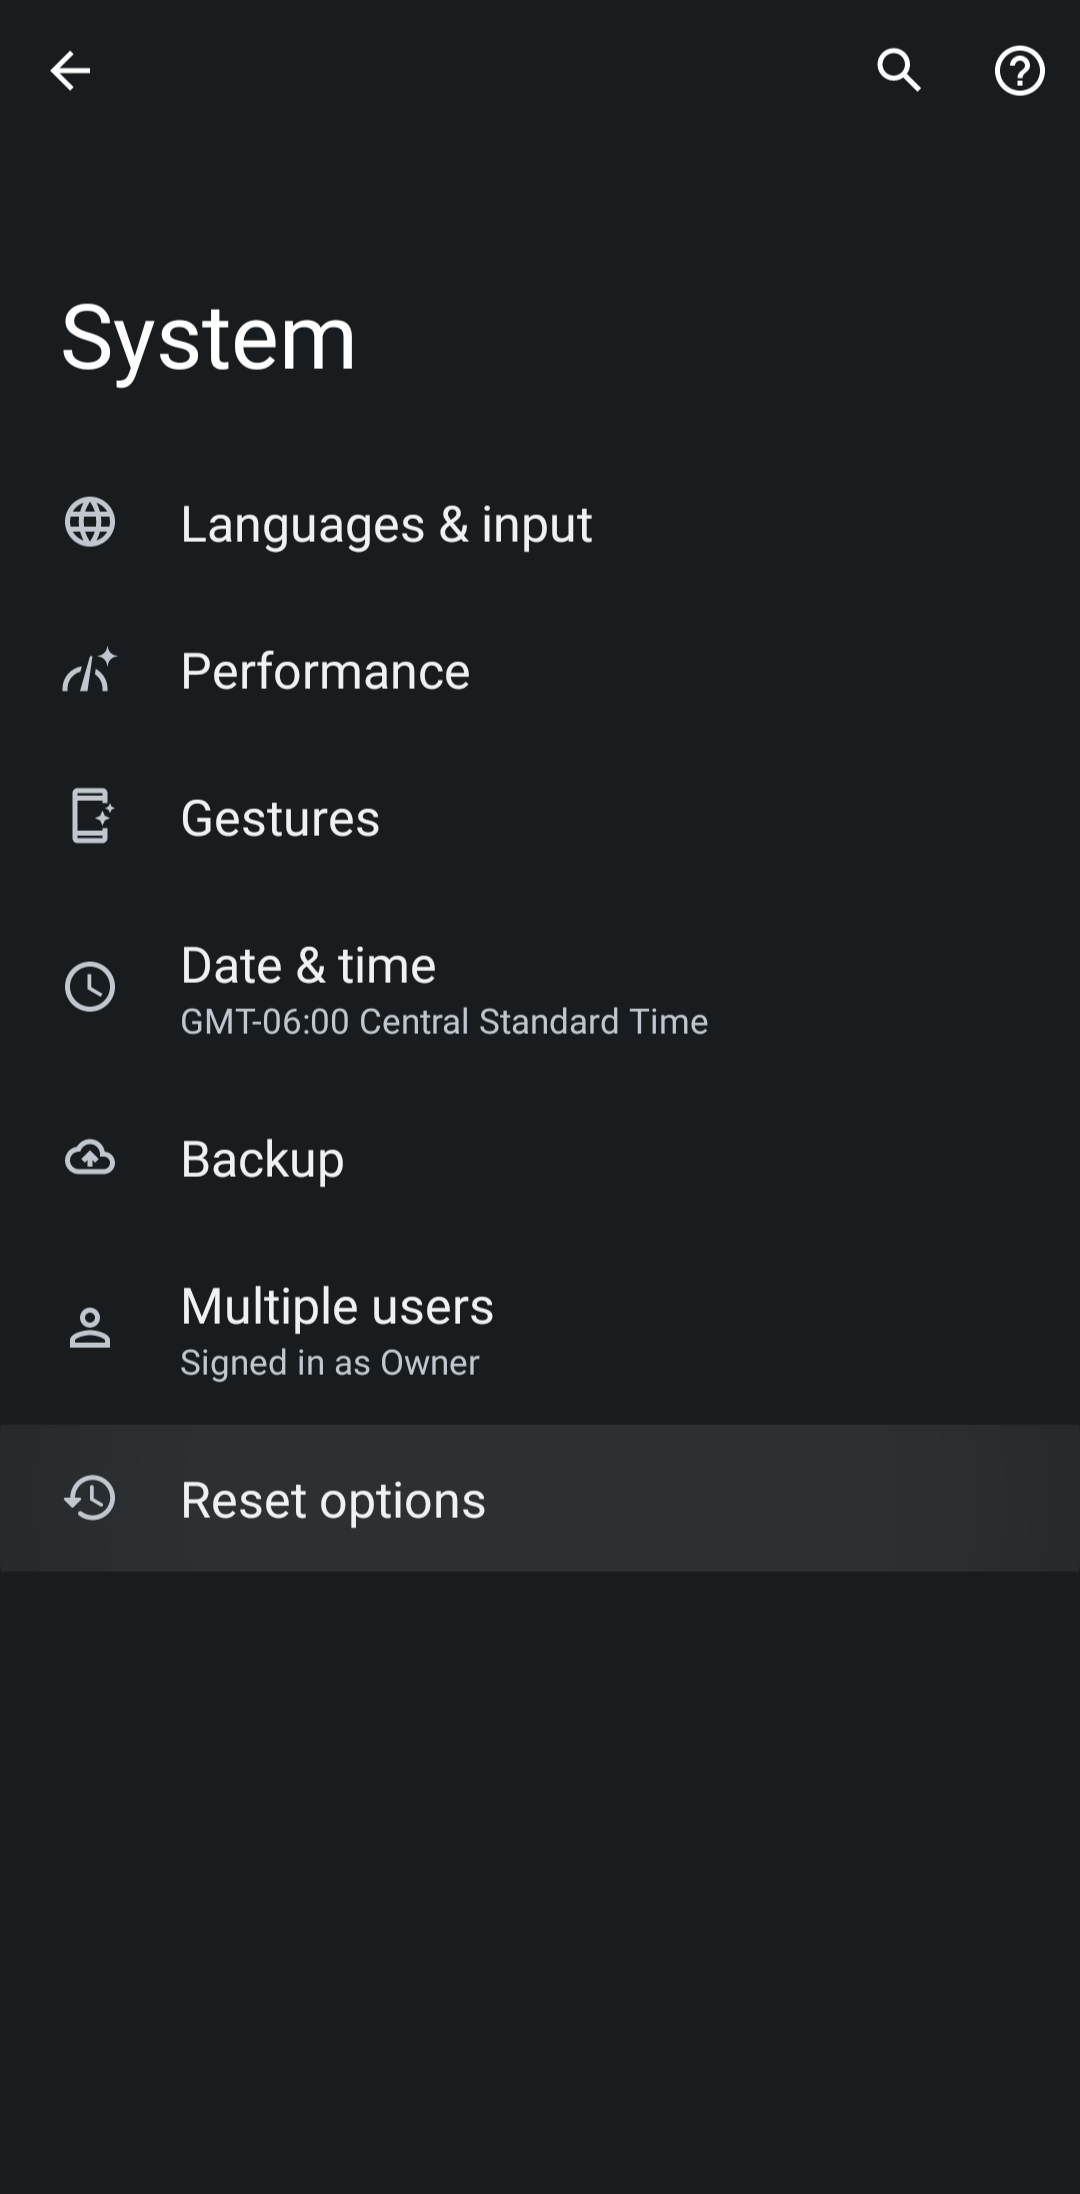 The System settings menu on an Android device.